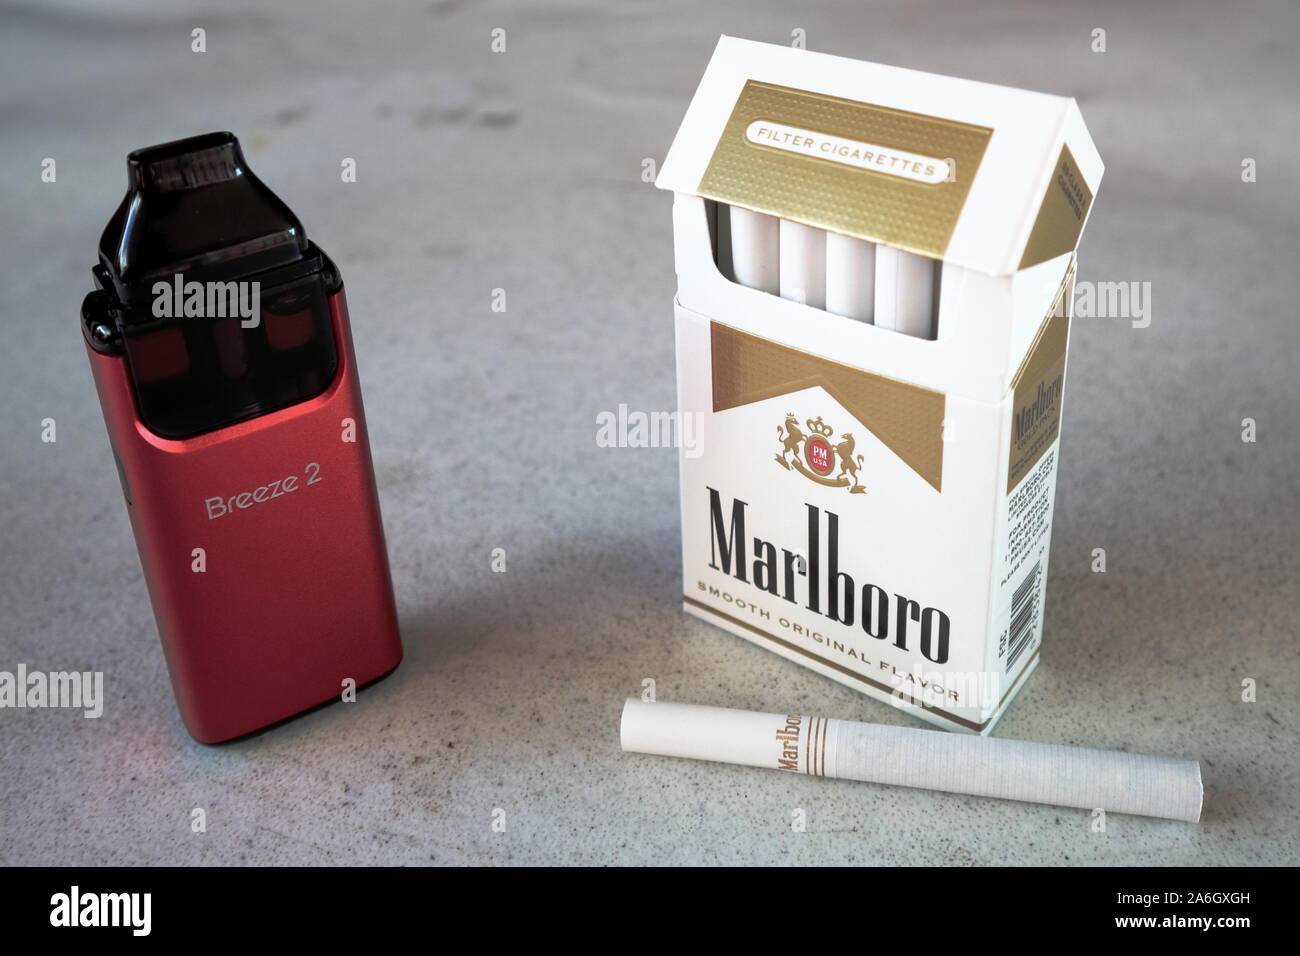 aspire breeze vape pod electronic cigarette device with a pack of marlboro cigarettes and one cigarette placed outside on a white textured table, isol Stock Photo